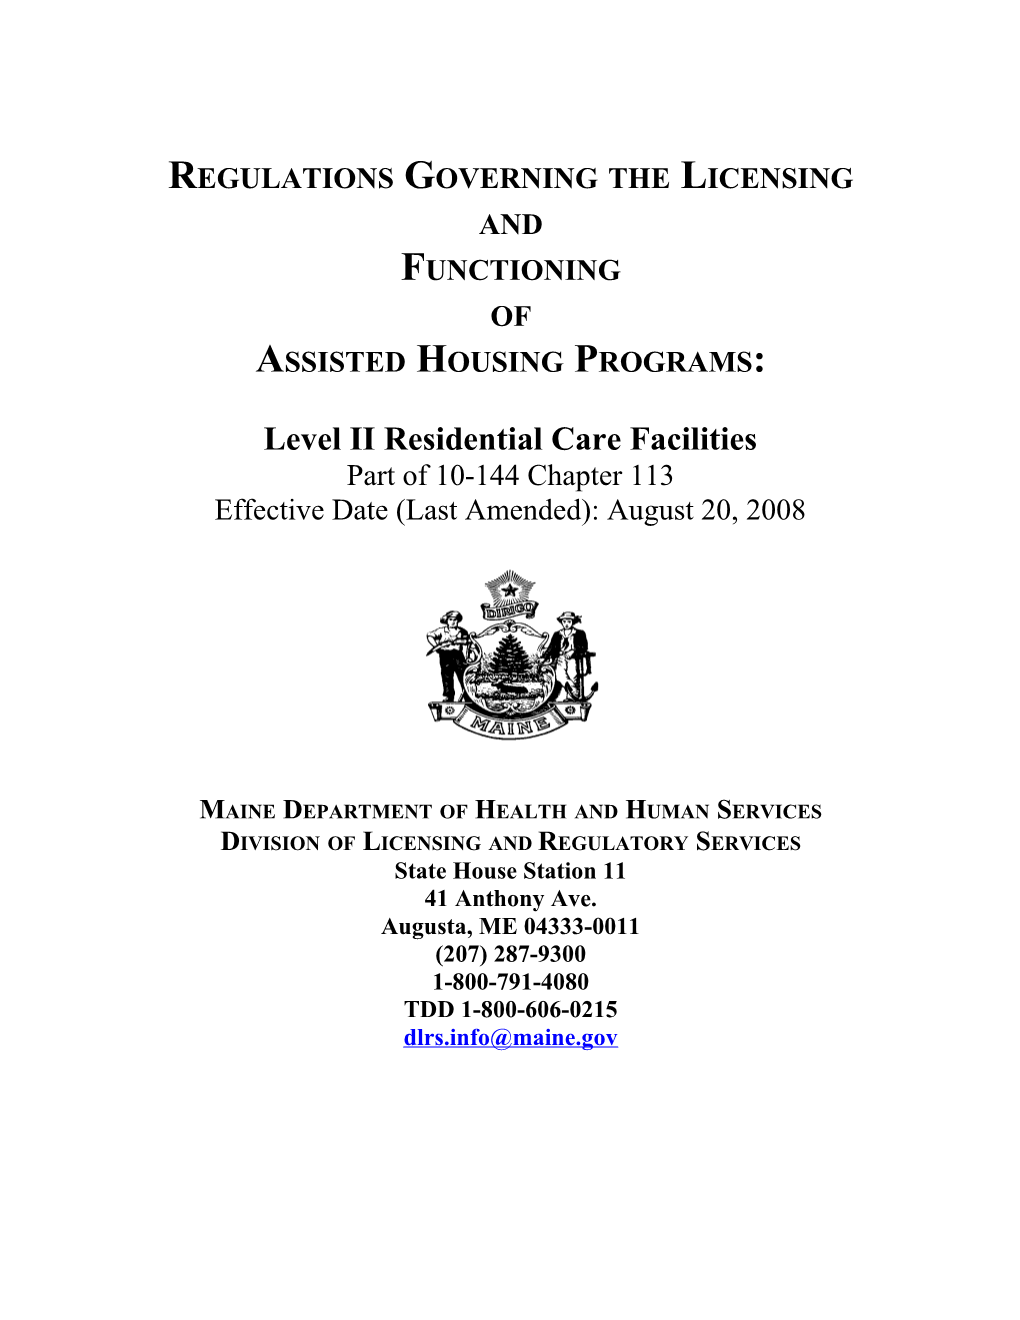 Regulations Governing the Licensing